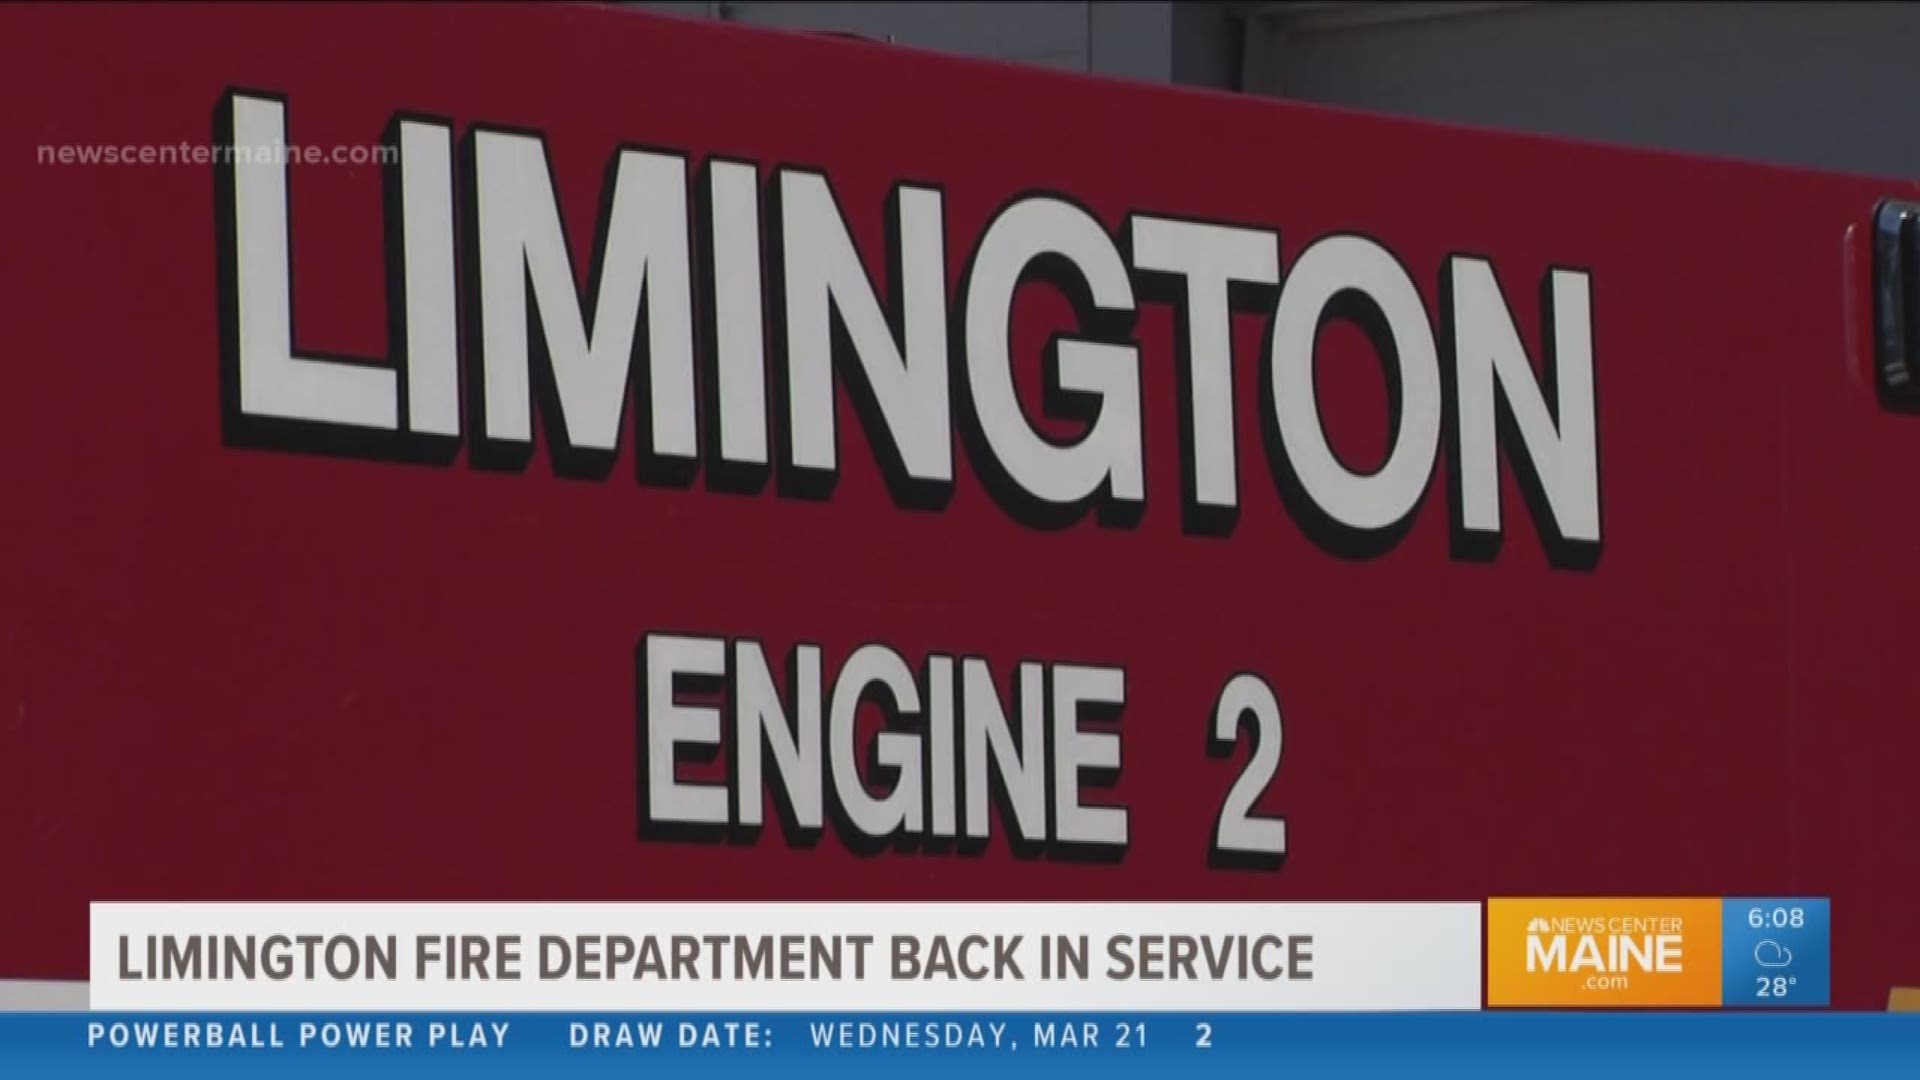 Limington fire department back up and running